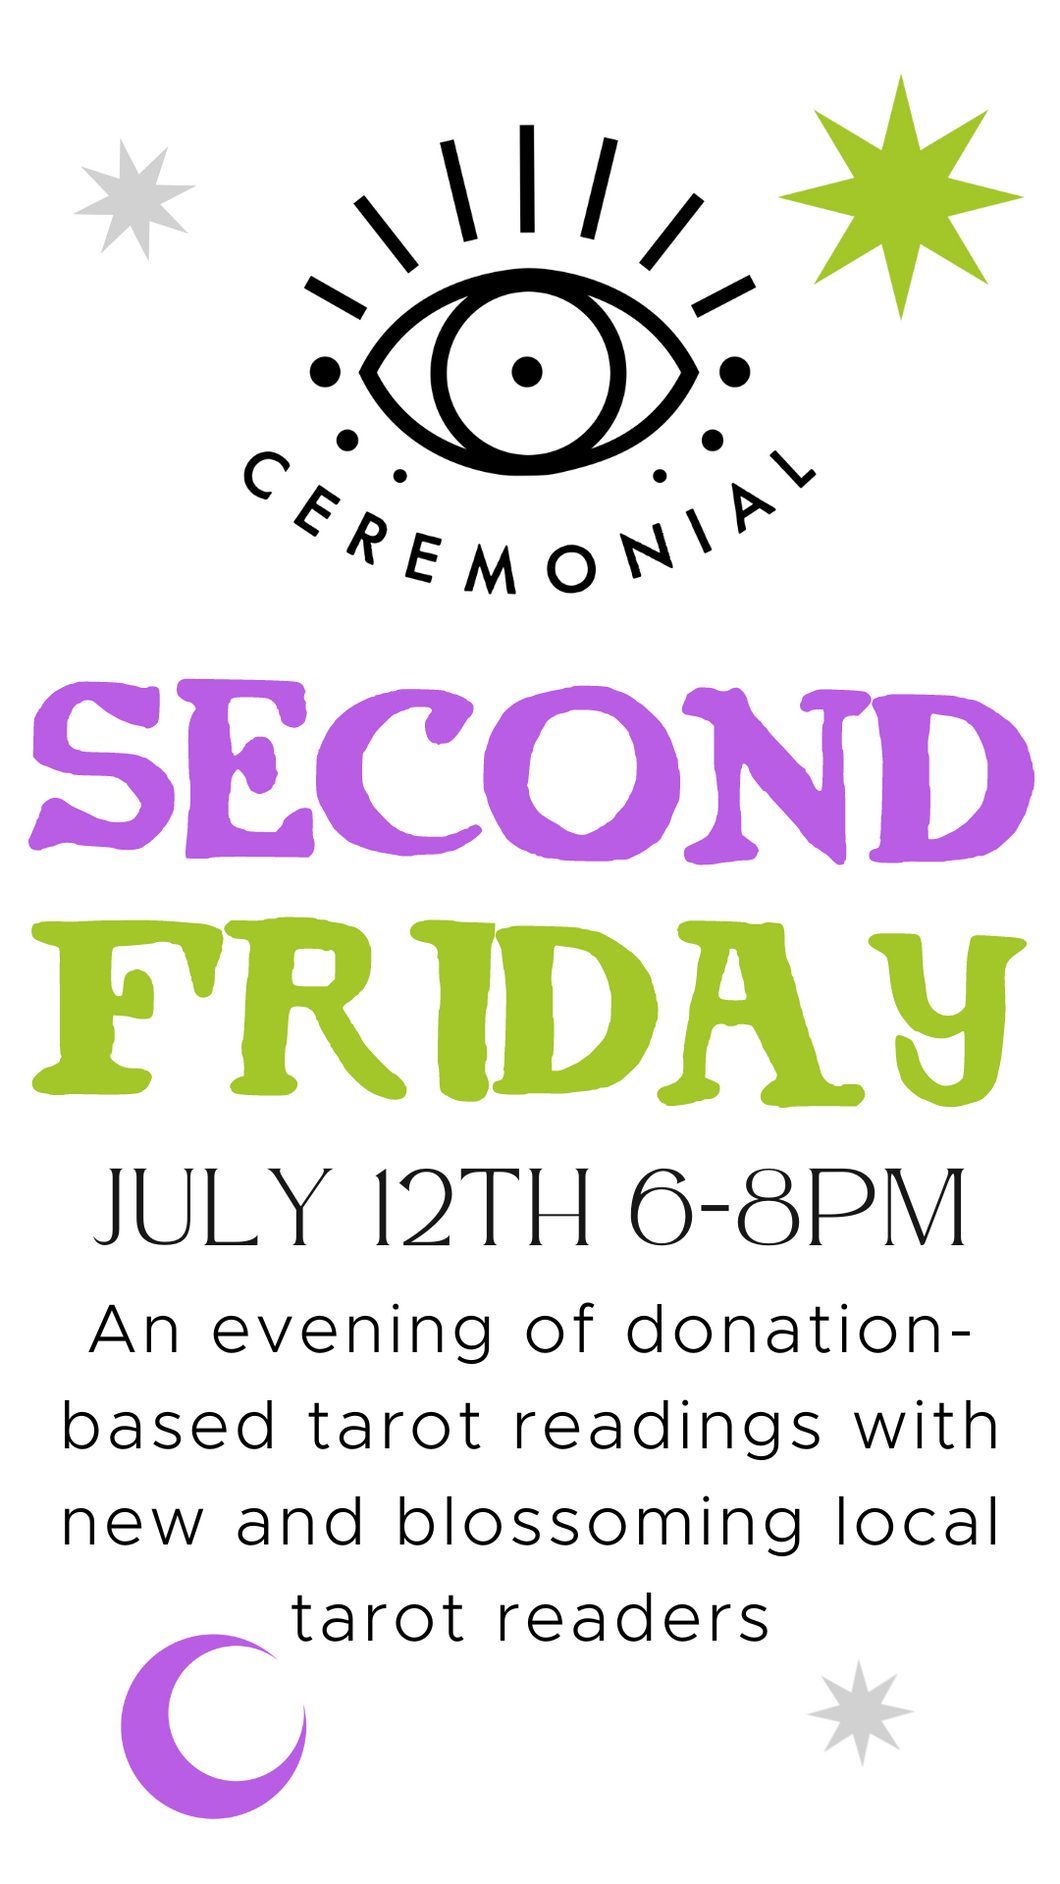 Second Friday ~ July 12th 6-8pm - An Evening of Donation-Based Tarot Readings